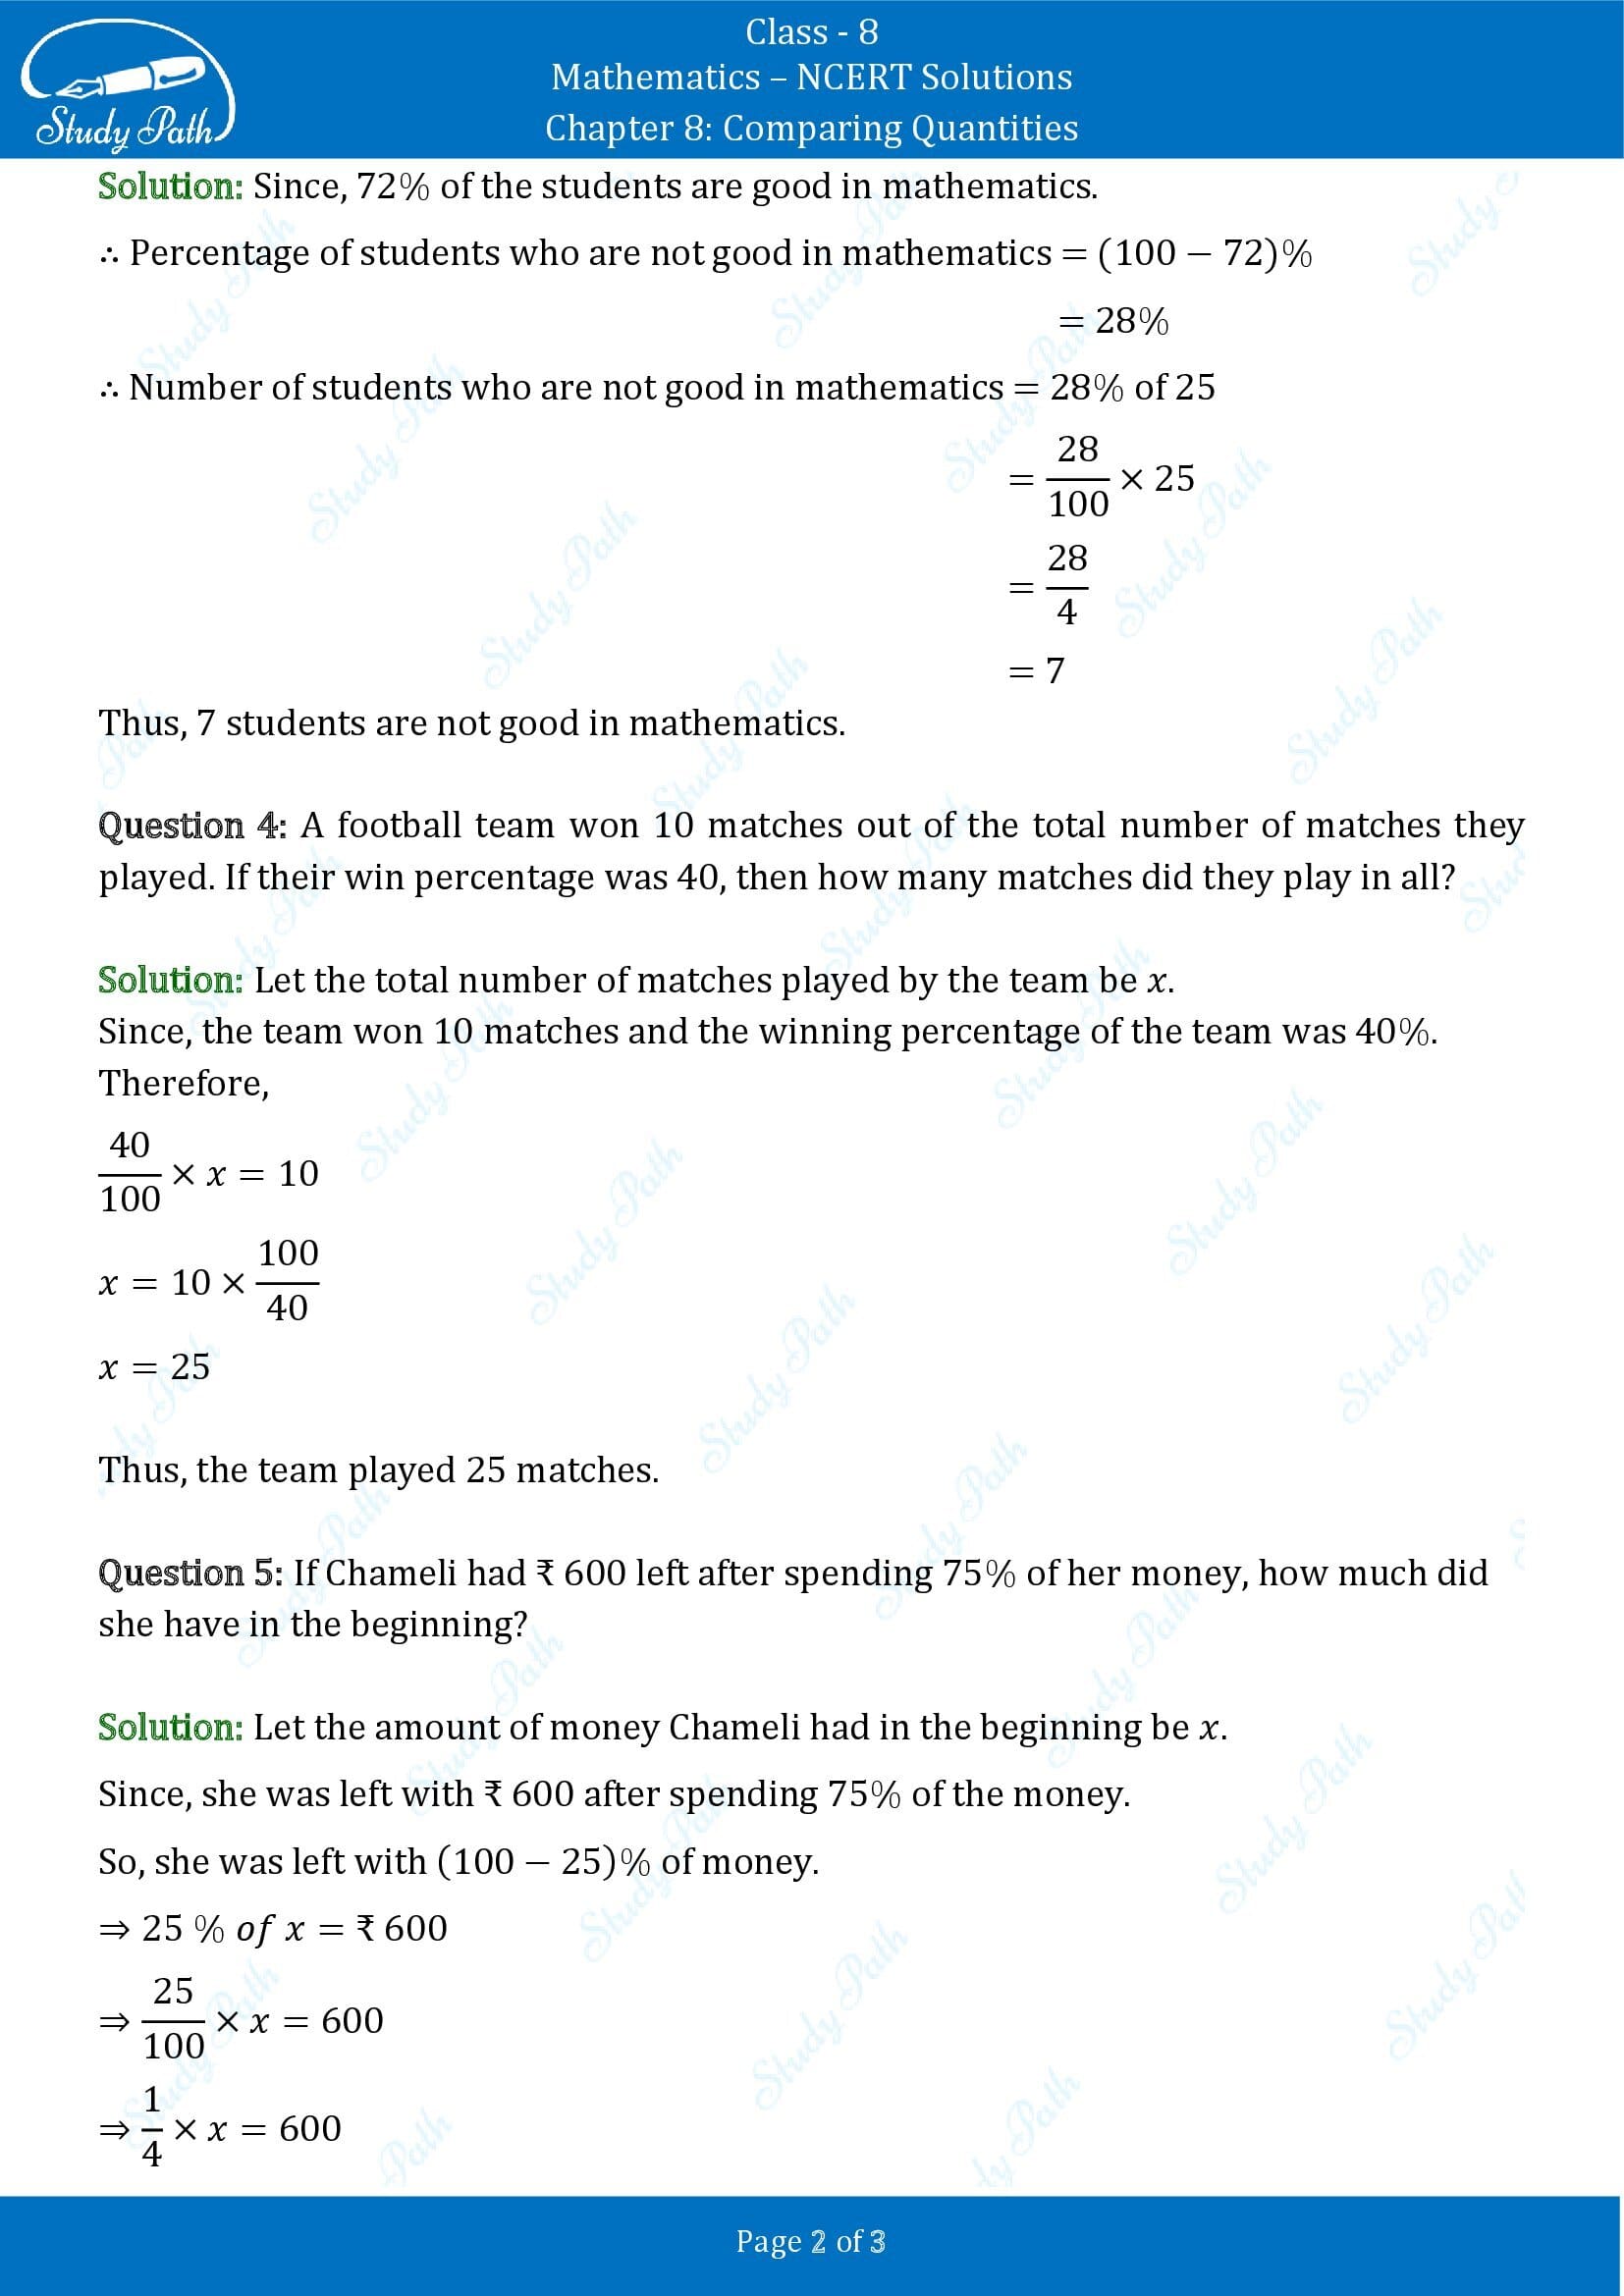 NCERT Solutions for Class 8 Maths Chapter 8 Comparing Quantities Exercise 8.1 00002